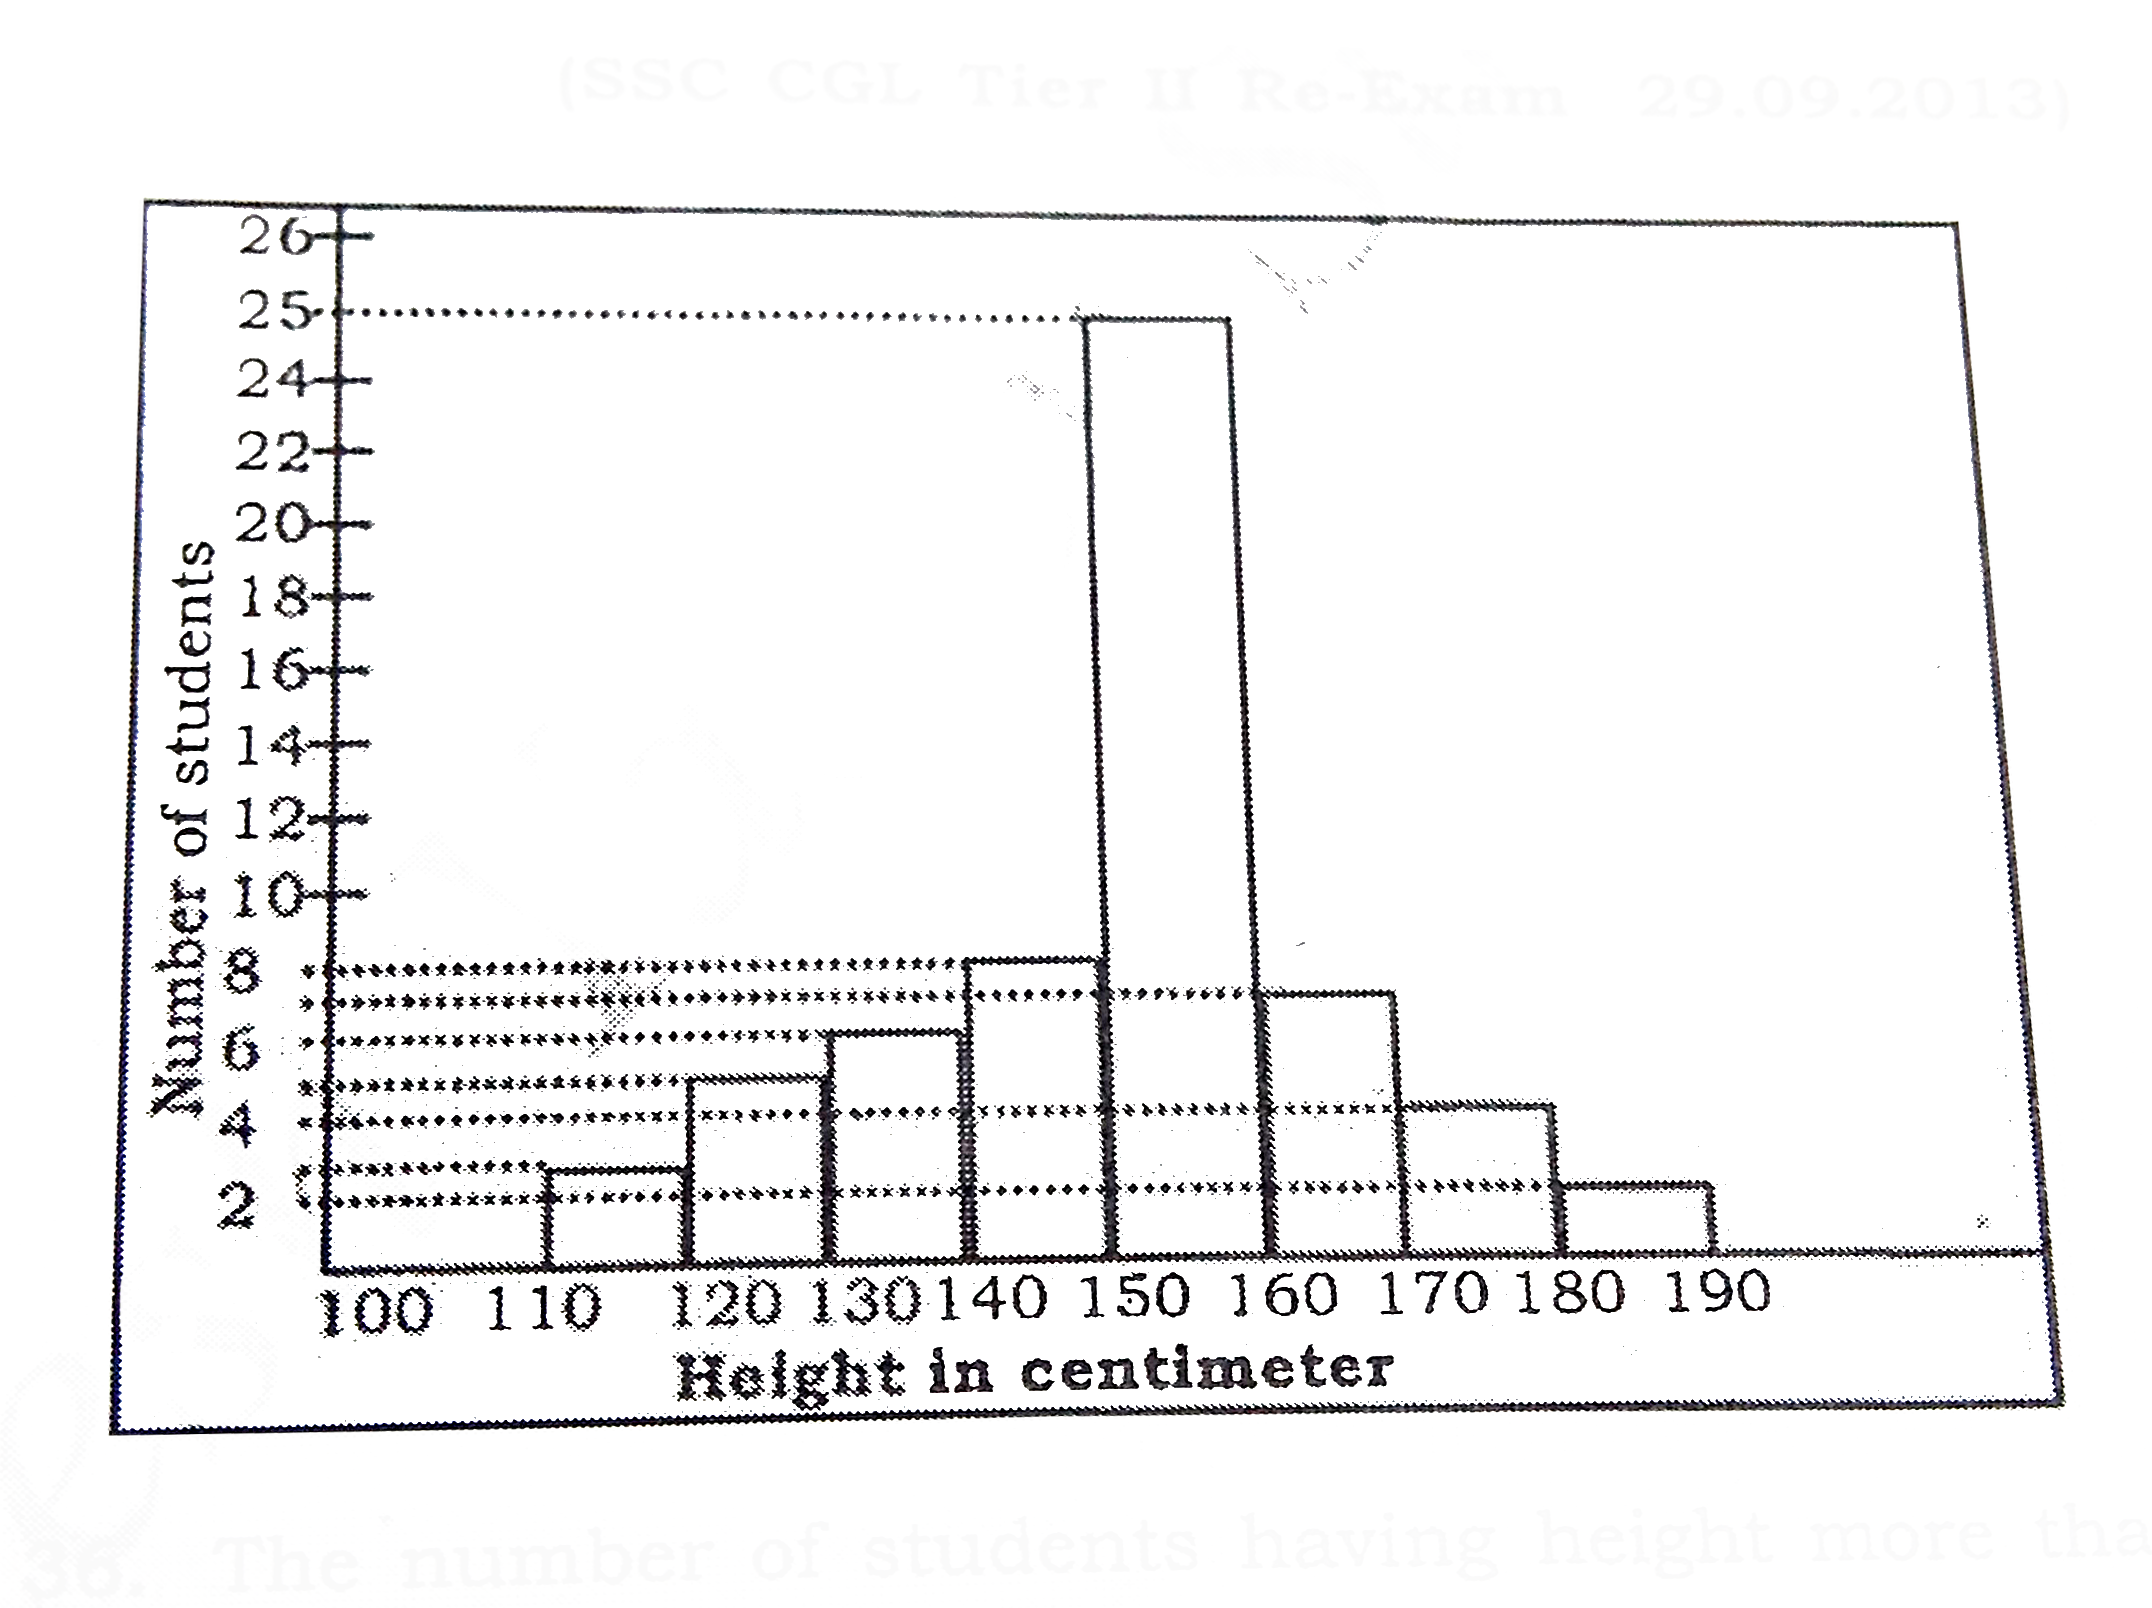 Following histogram depicts the range of heights of students in a class of 60 students Study the same and answer the questions       150 cm से अधिक ऊचाई वाले छात्रों की संख्या बताये ।